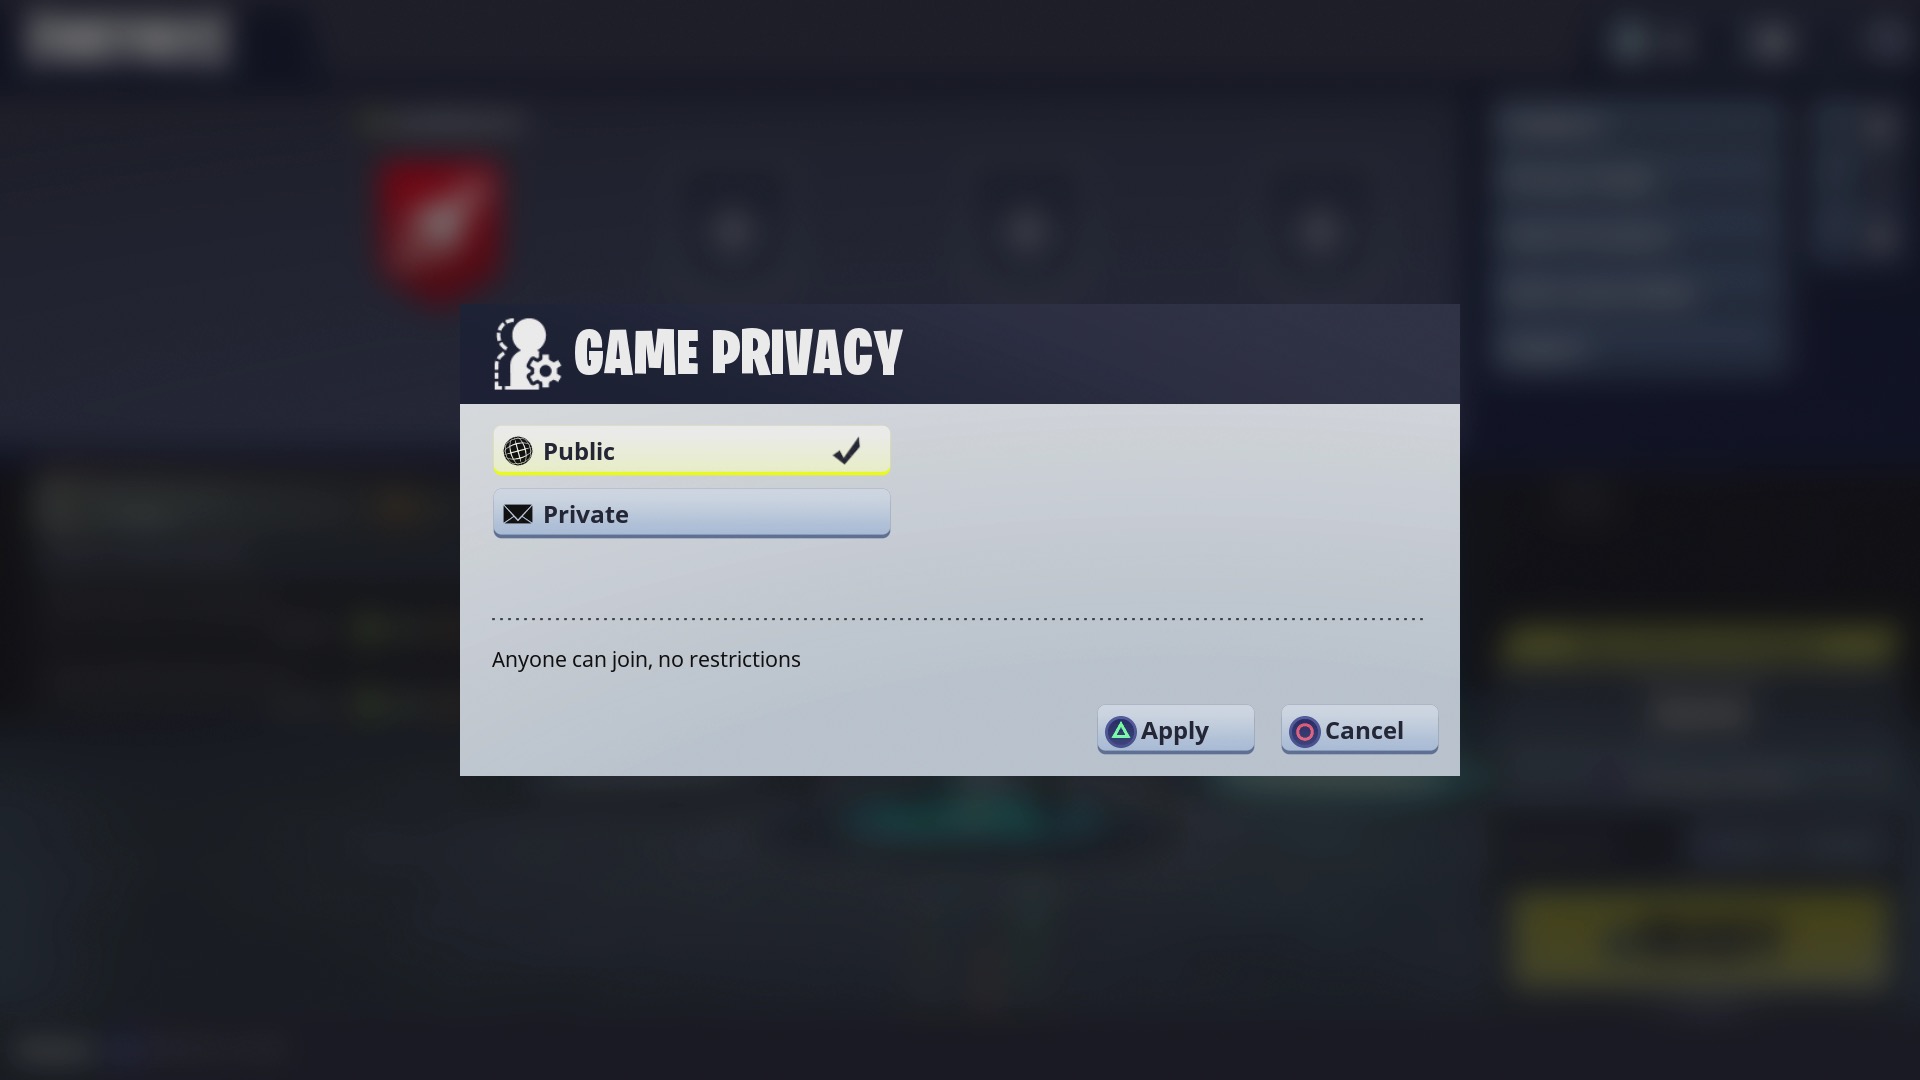 Fortnite Cross Platform Crossplay Guide For Pc Ps4 Xbox One